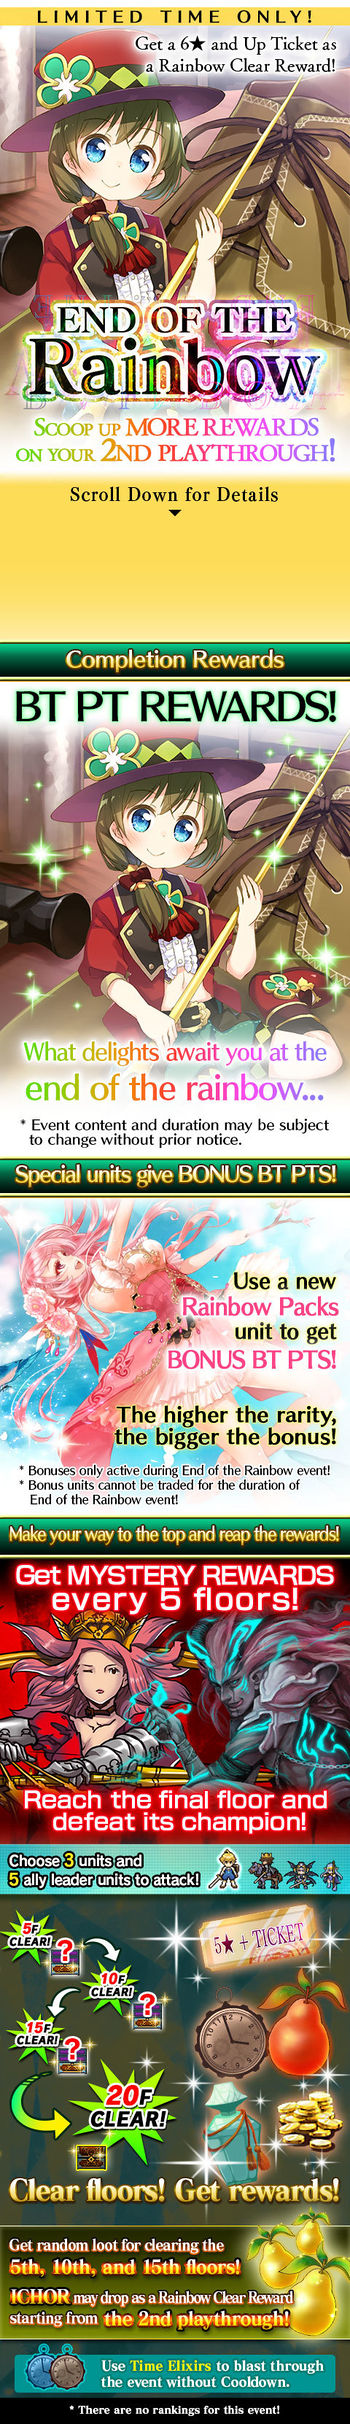 End of the Rainbow release.jpg